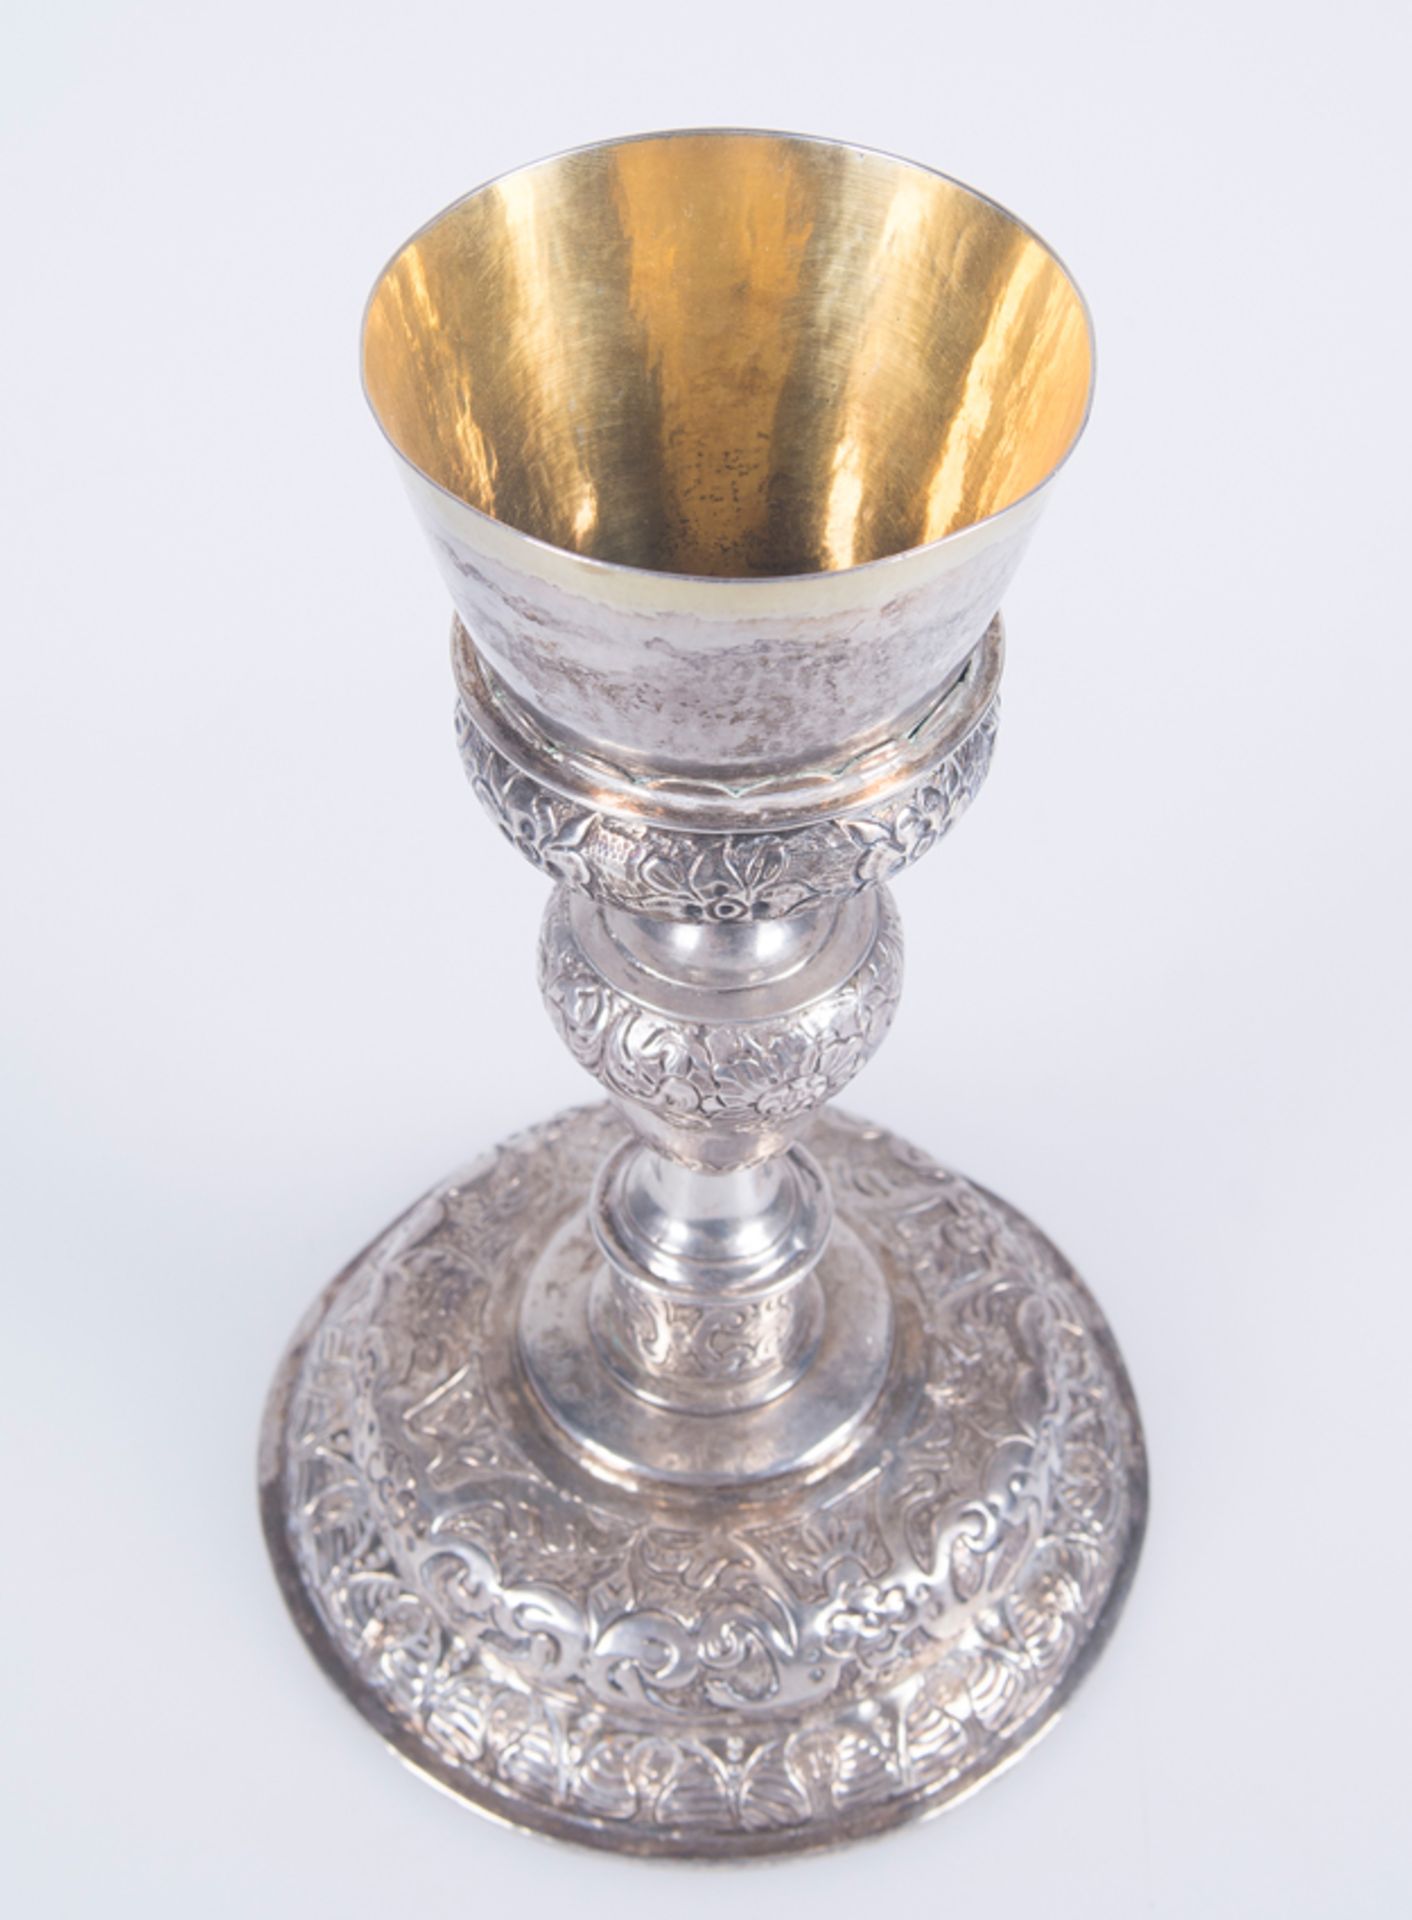 Embossed and chased silver chalice with a silver vermeil interior. Possibly Mexican. Late 16th cent - Image 3 of 8